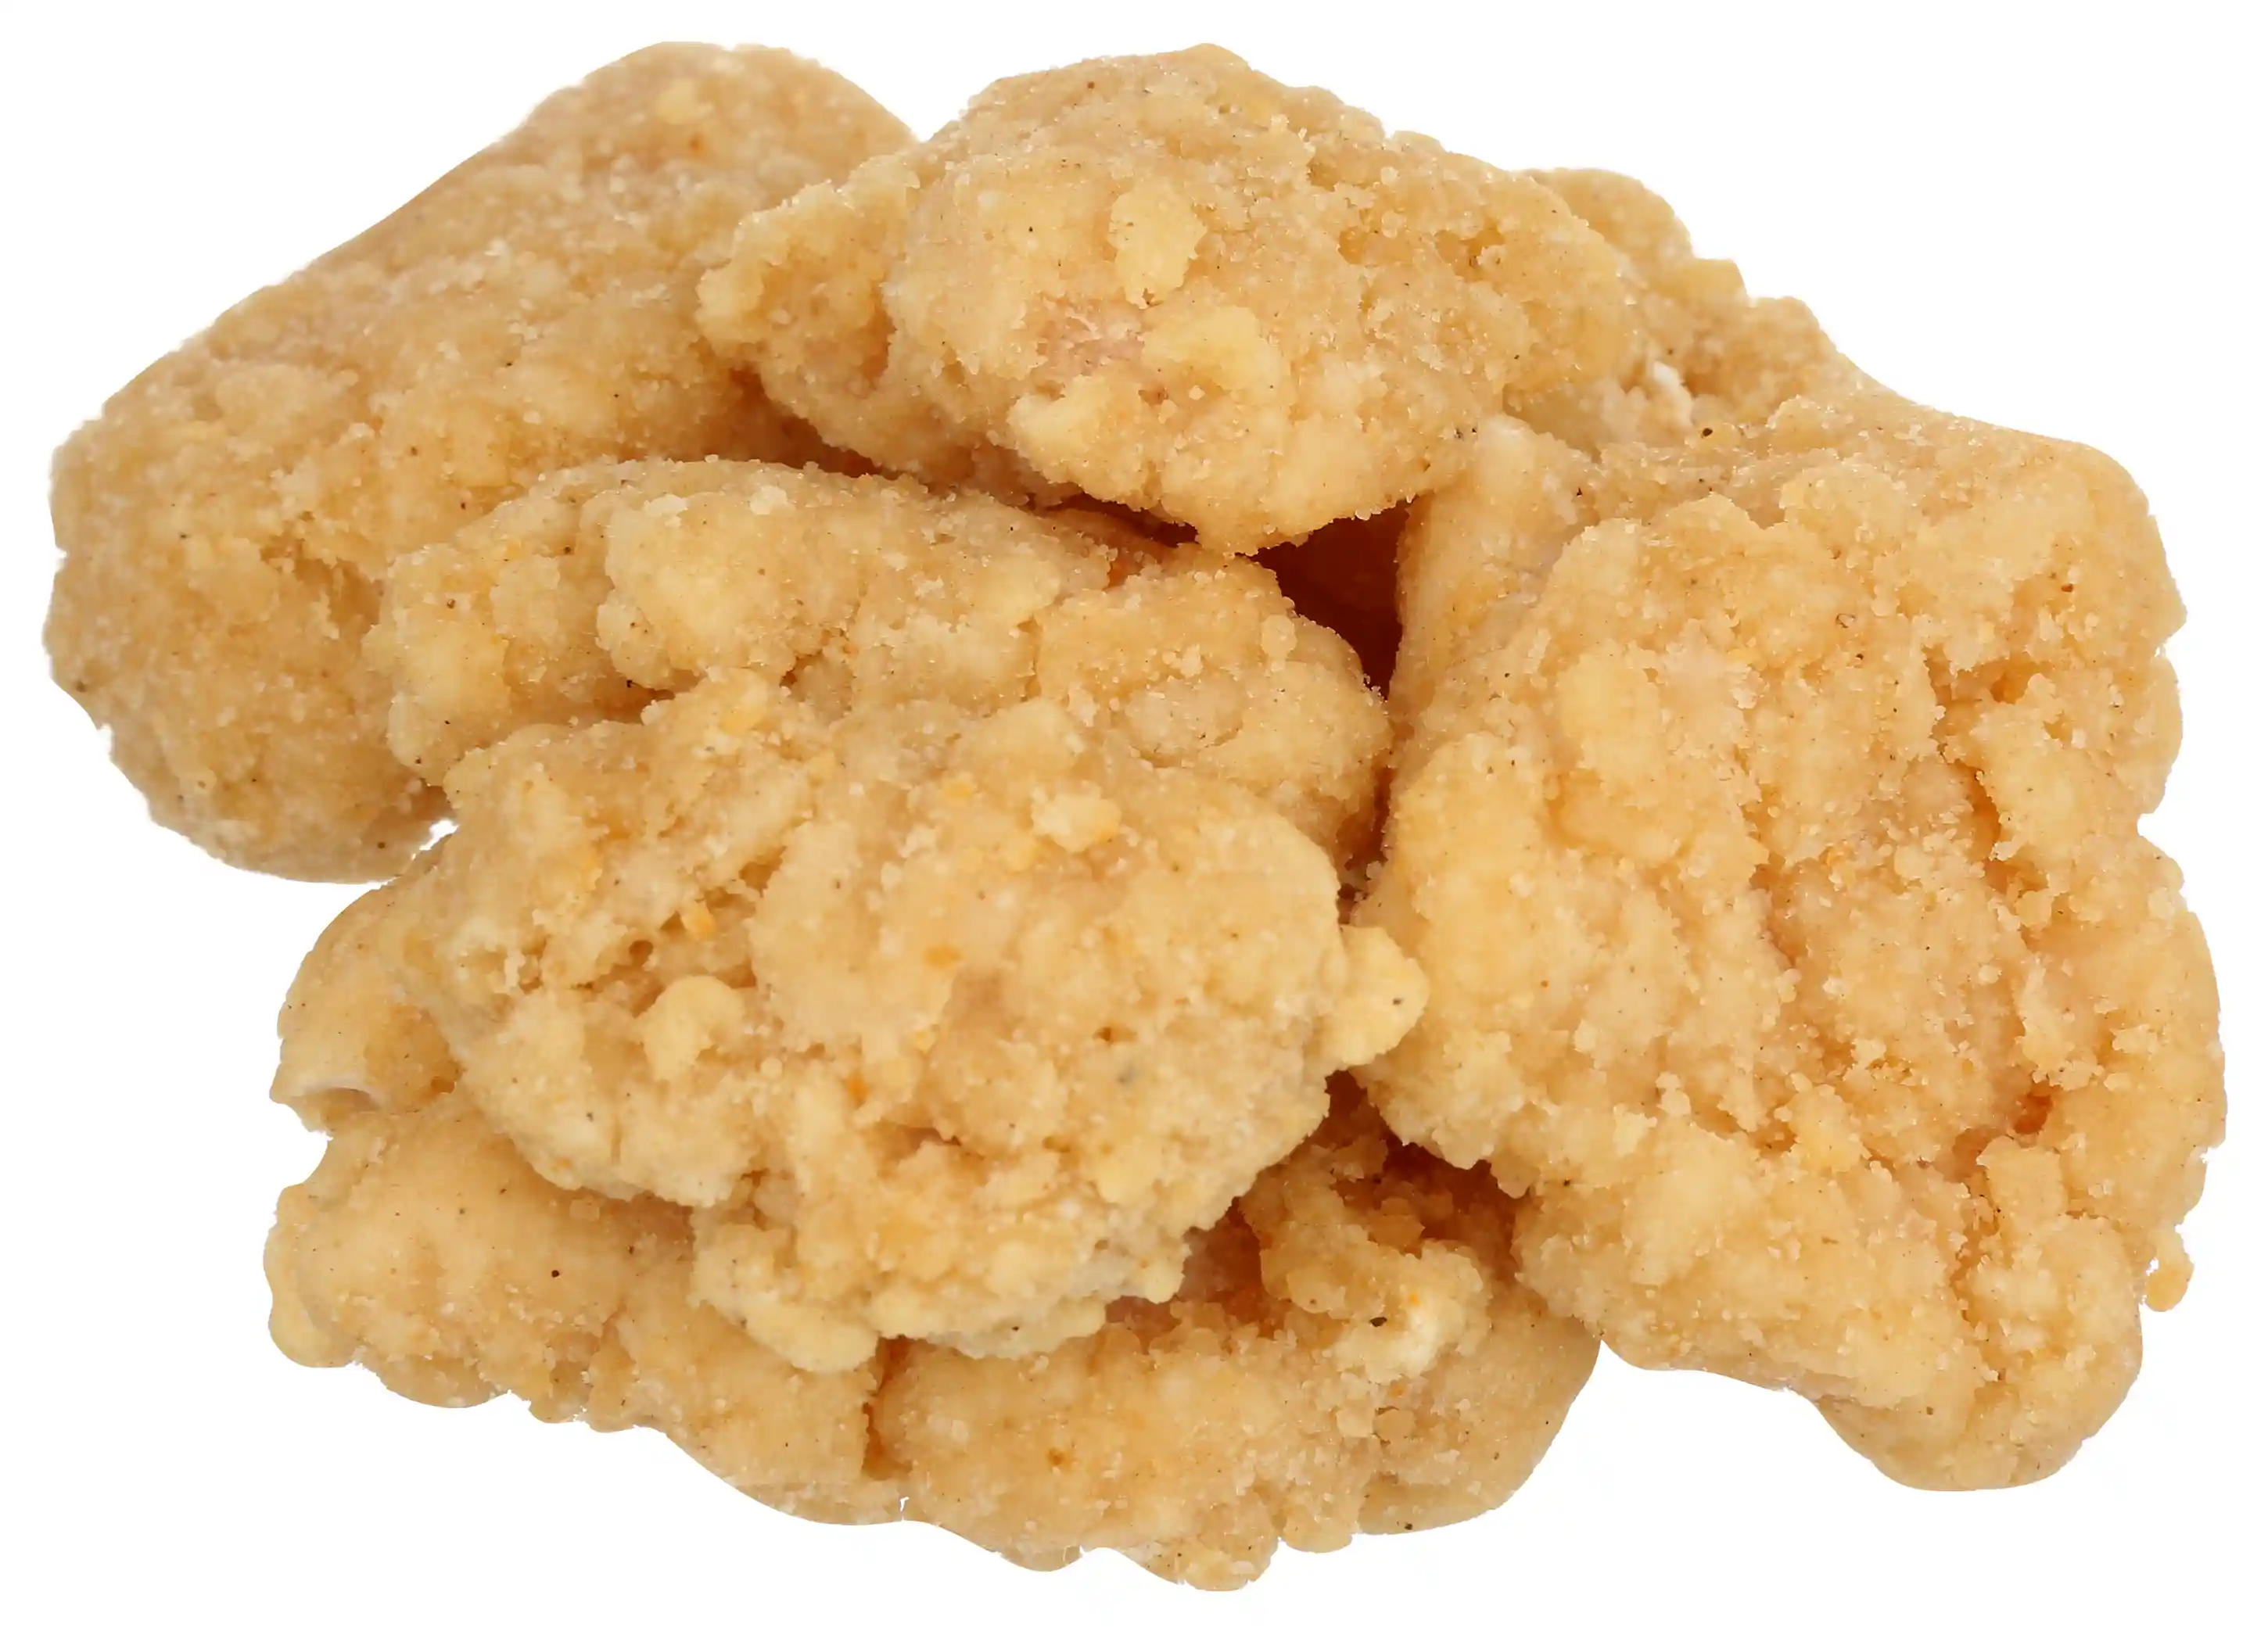 Tyson Red Label® NAE Whole Muscle Partially Cooked Sweet Classic Chicken Nuggetshttps://images.salsify.com/image/upload/s--dDlqOvL9--/q_25/t6hrqox1gp8kmq0uawlg.webp